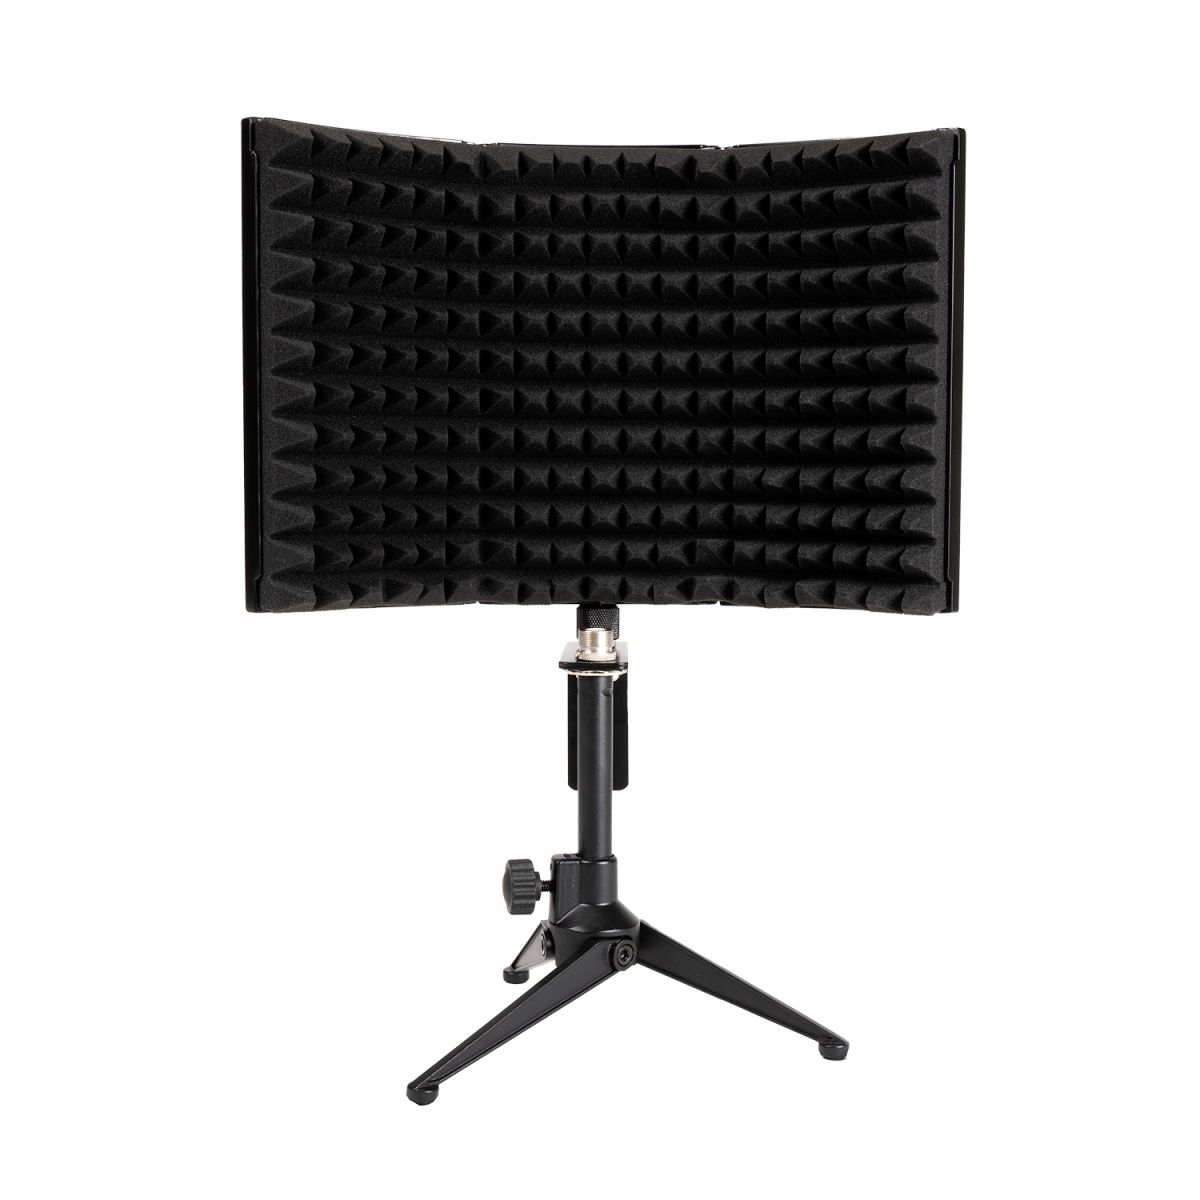 An image of Trumix TM-MRF-103 3 Panel Reflection Shield - Microphone Reflection Filter | PMT...